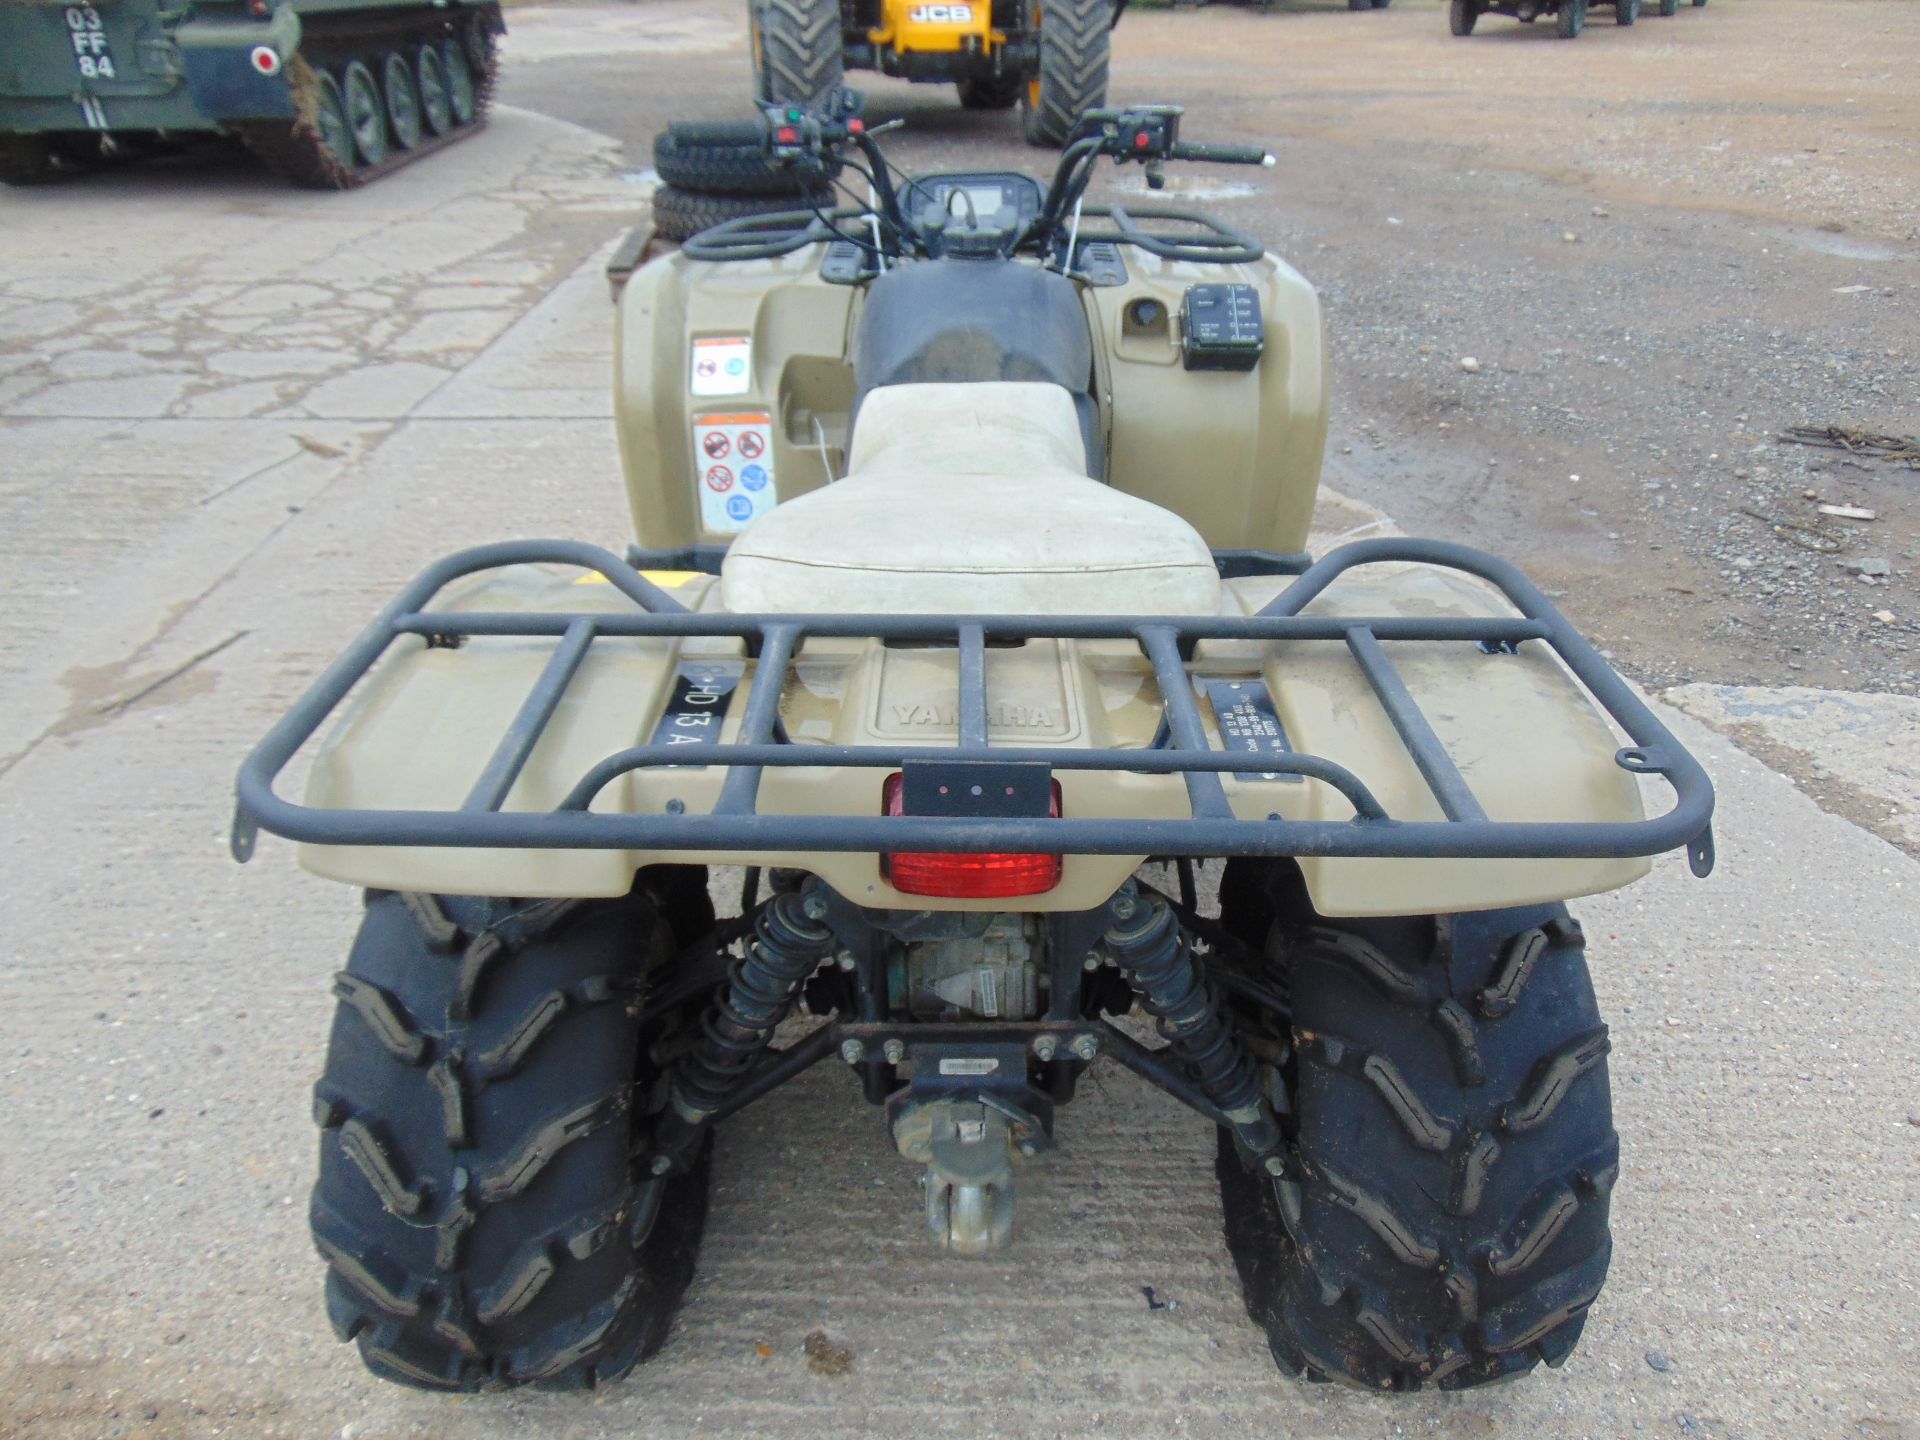 Military Specification Yamaha Grizzly 450 4 x 4 ATV Quad Bike - Image 6 of 16